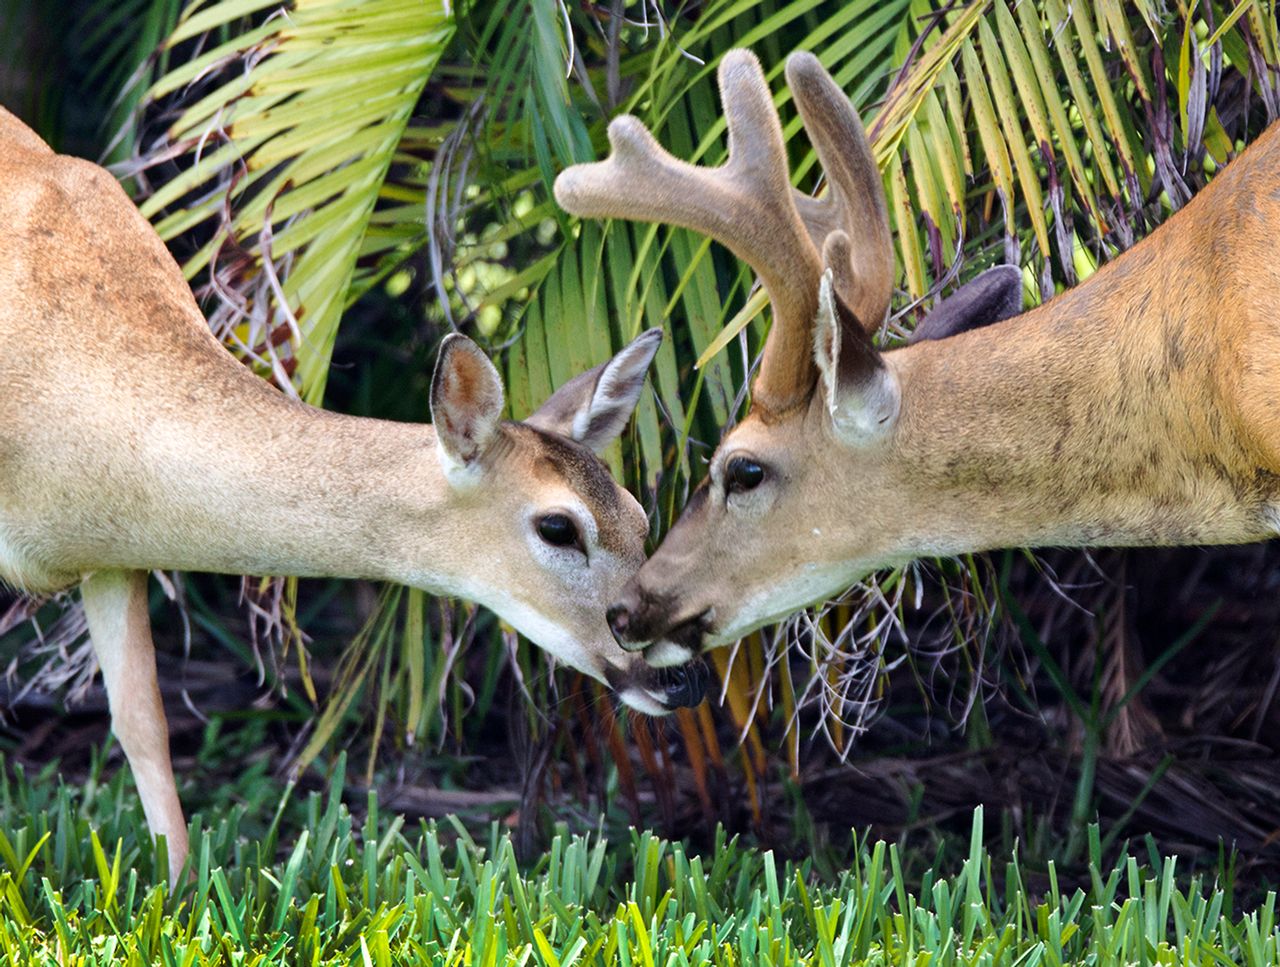 Hike through the National Key Deer Refuge to spot the area's native wildlife including the tiny endangered Key deer, found only in the Florida Keys. Photo: Rob O'Neal